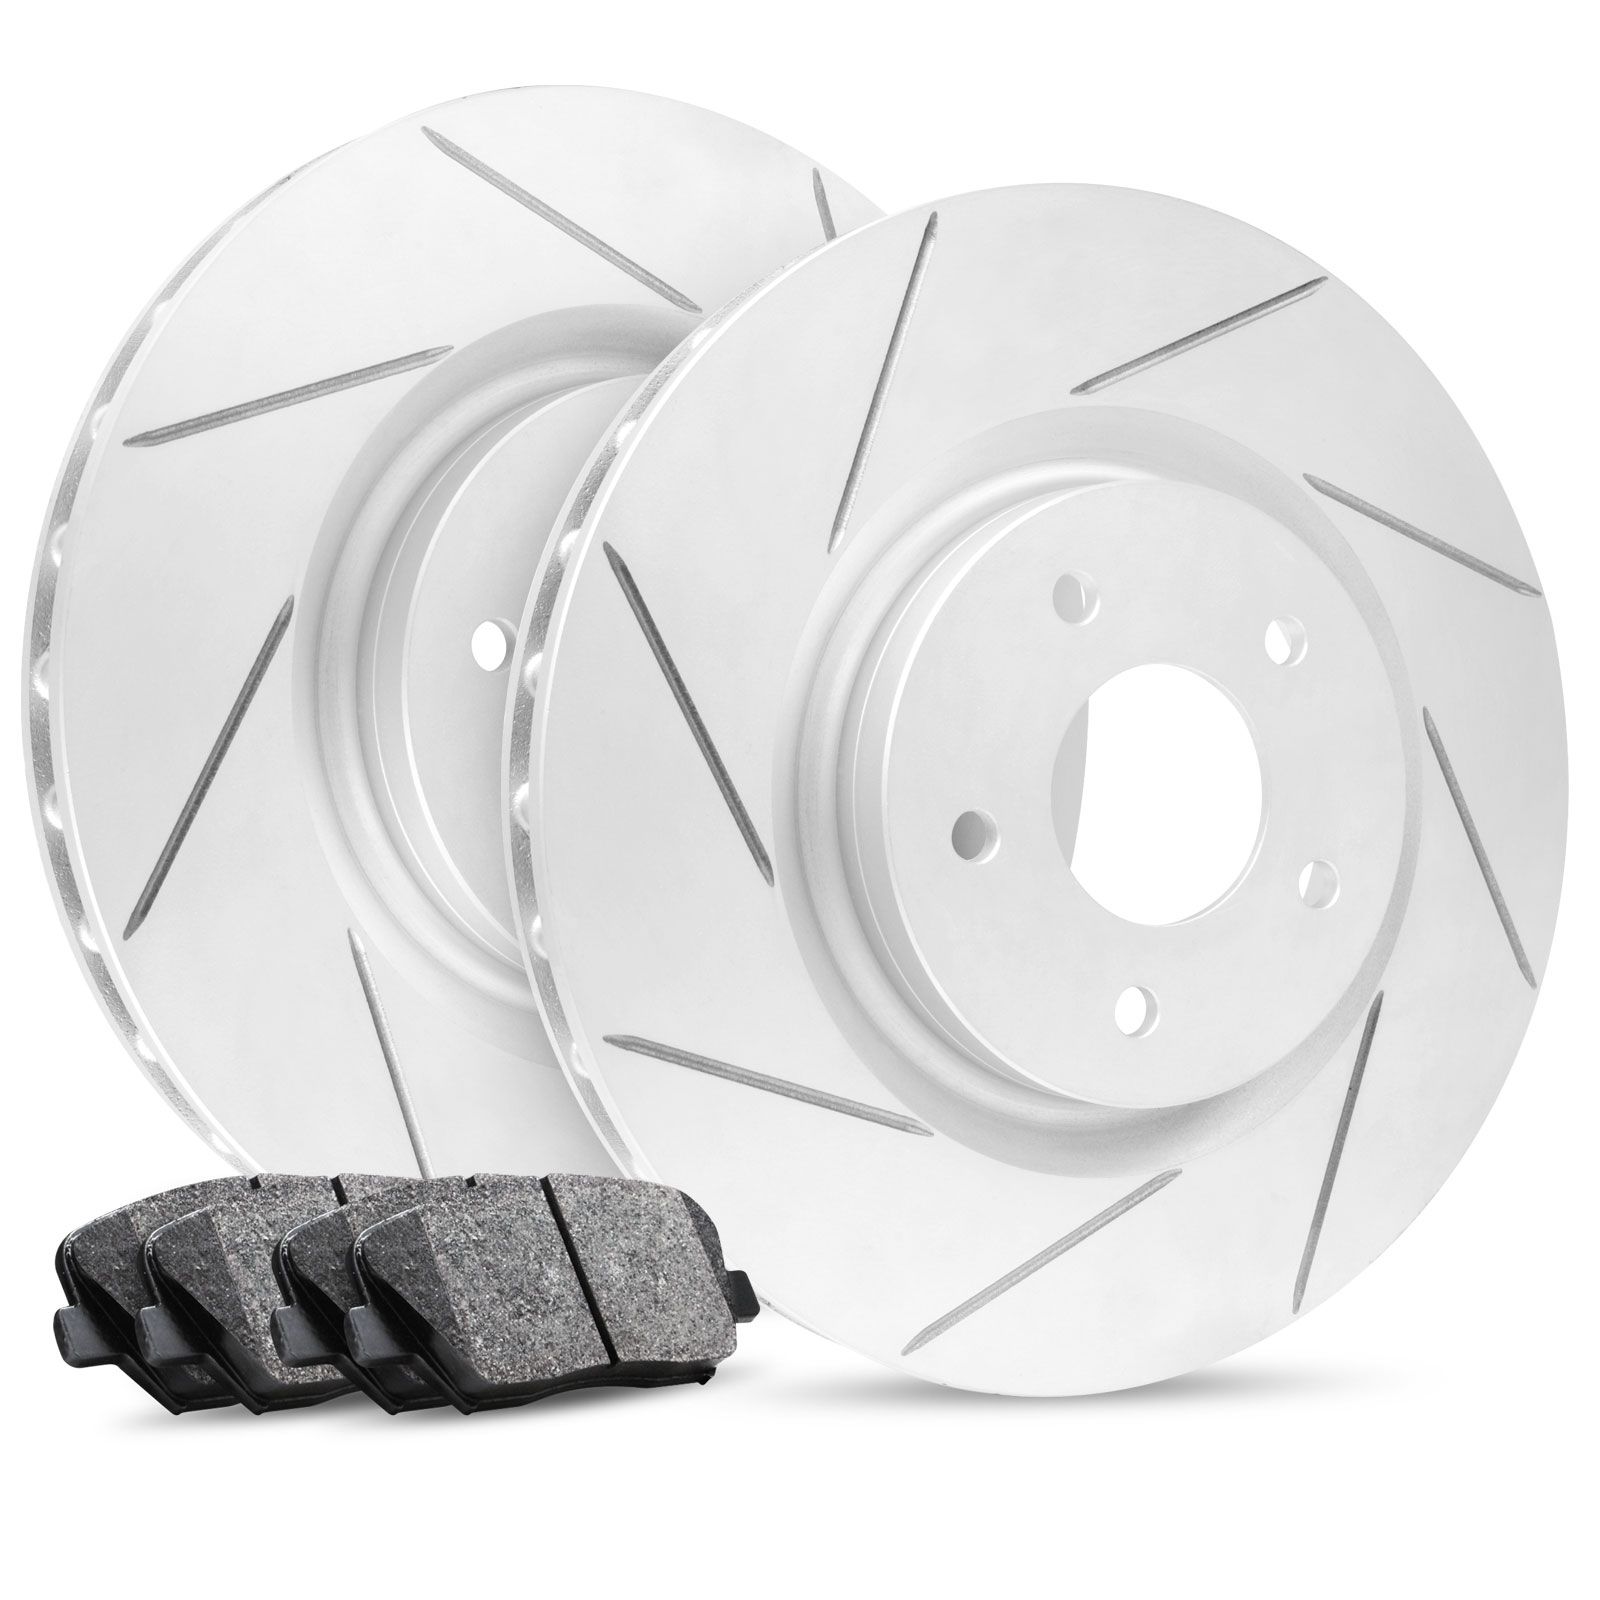 R1 Concepts Fits 1994 1995 1996 1997 1998 Ford Mustang Front Premier Slotted Brake Disc Rotors & Ceramic Pads